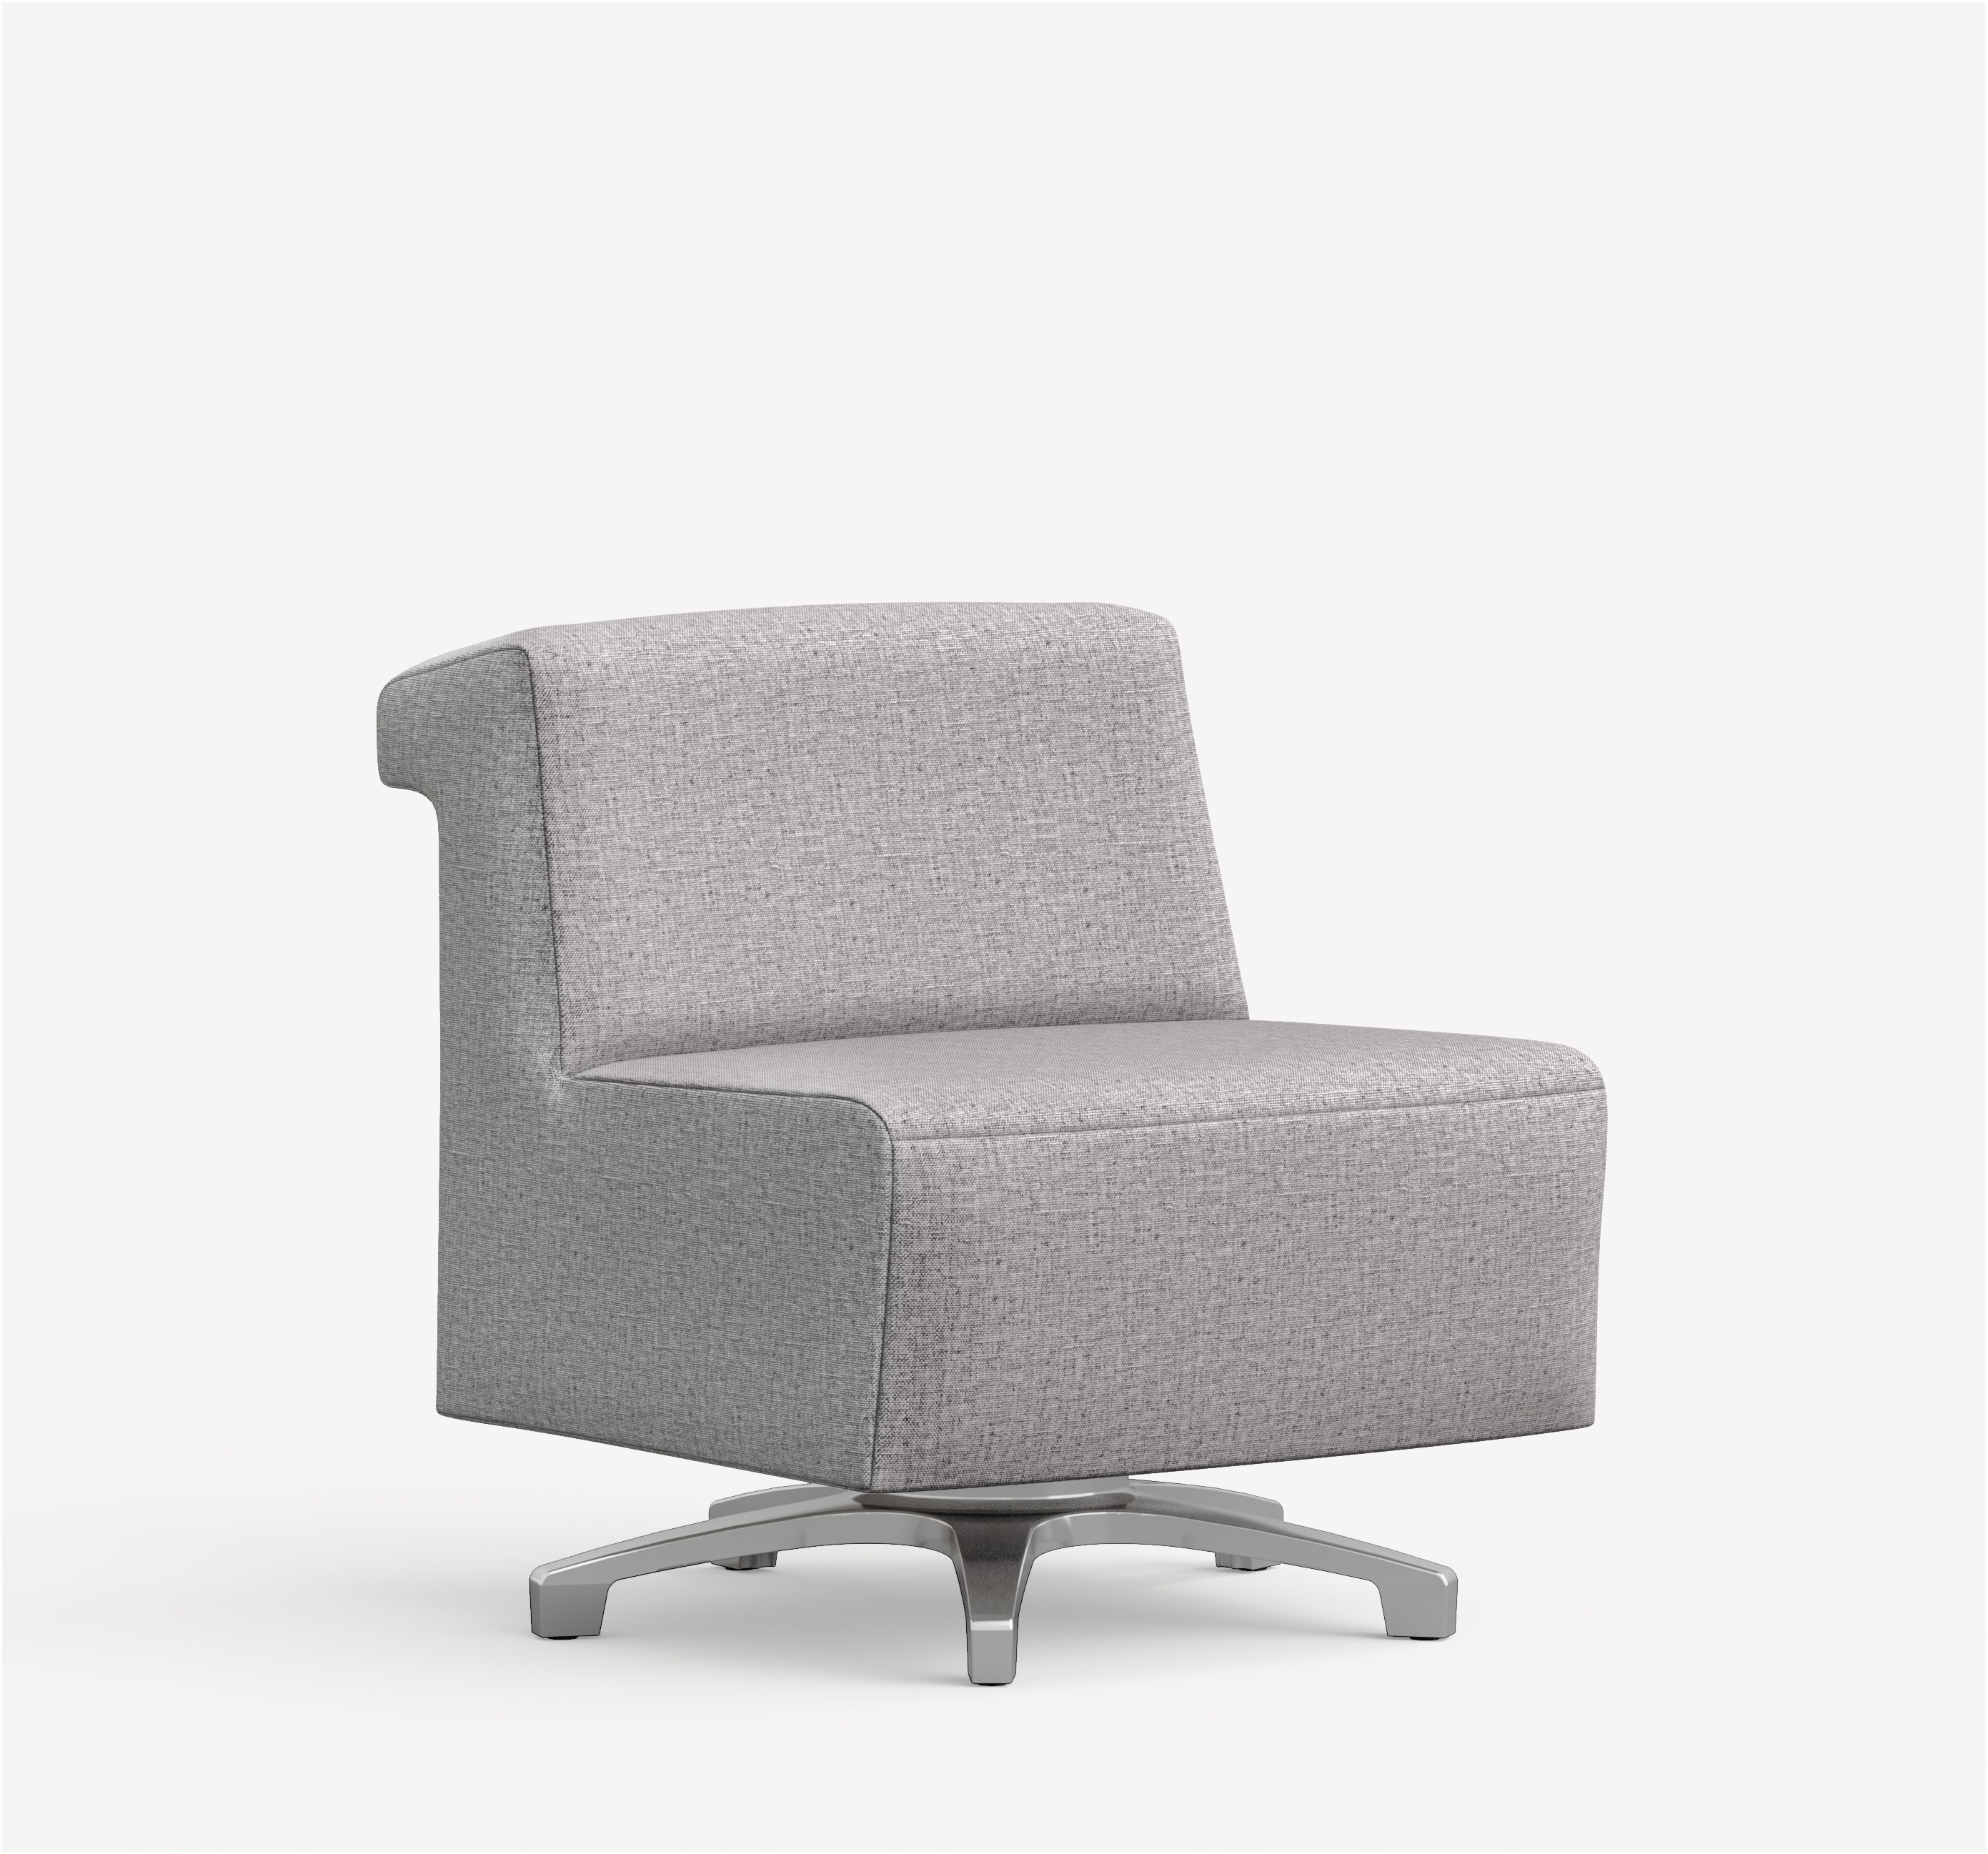 Three-quarter side view of the Allsteel Linger swivel lounge chair with aluminum base and light grey upholstery.